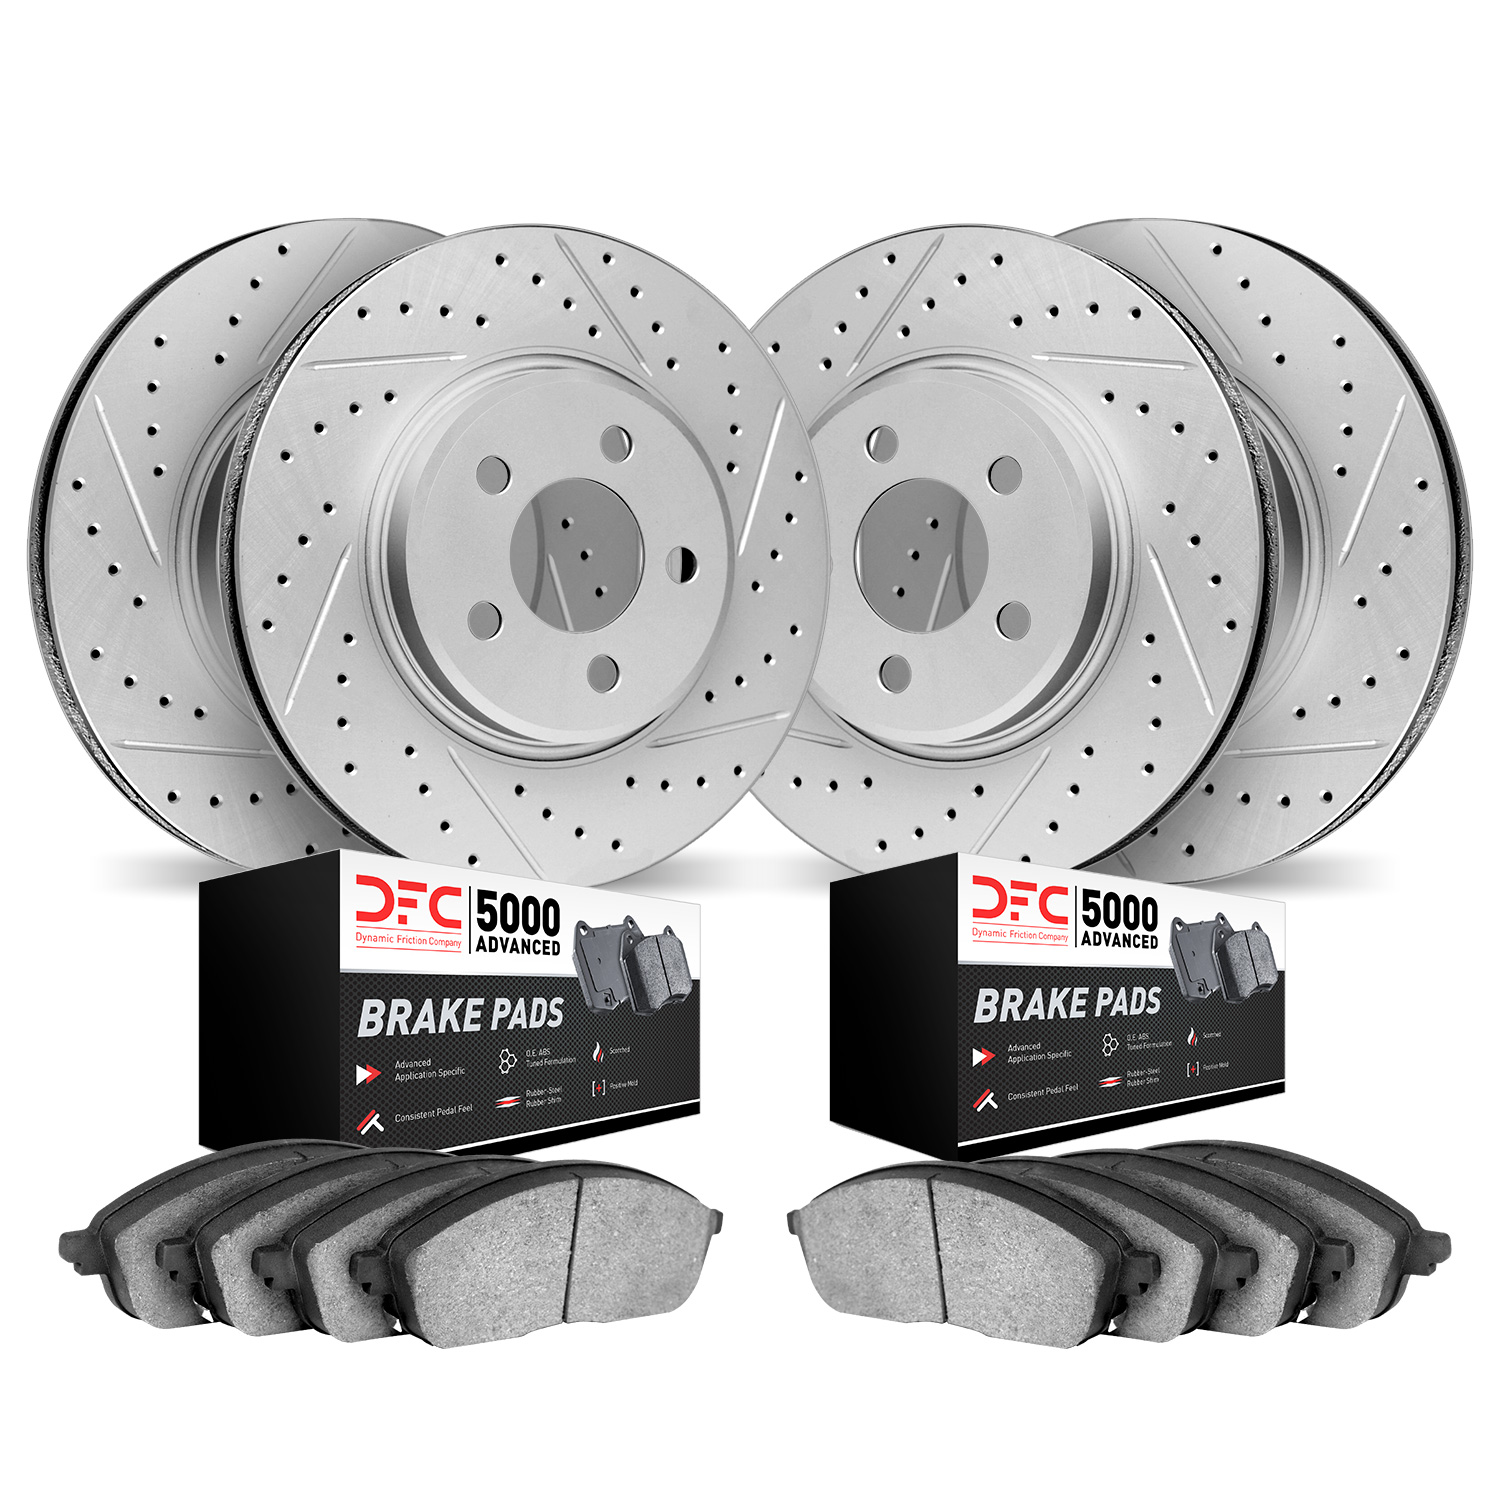 2504-11008 Geoperformance Drilled/Slotted Rotors w/5000 Advanced Brake Pads Kit, 2005-2009 Land Rover, Position: Front and Rear